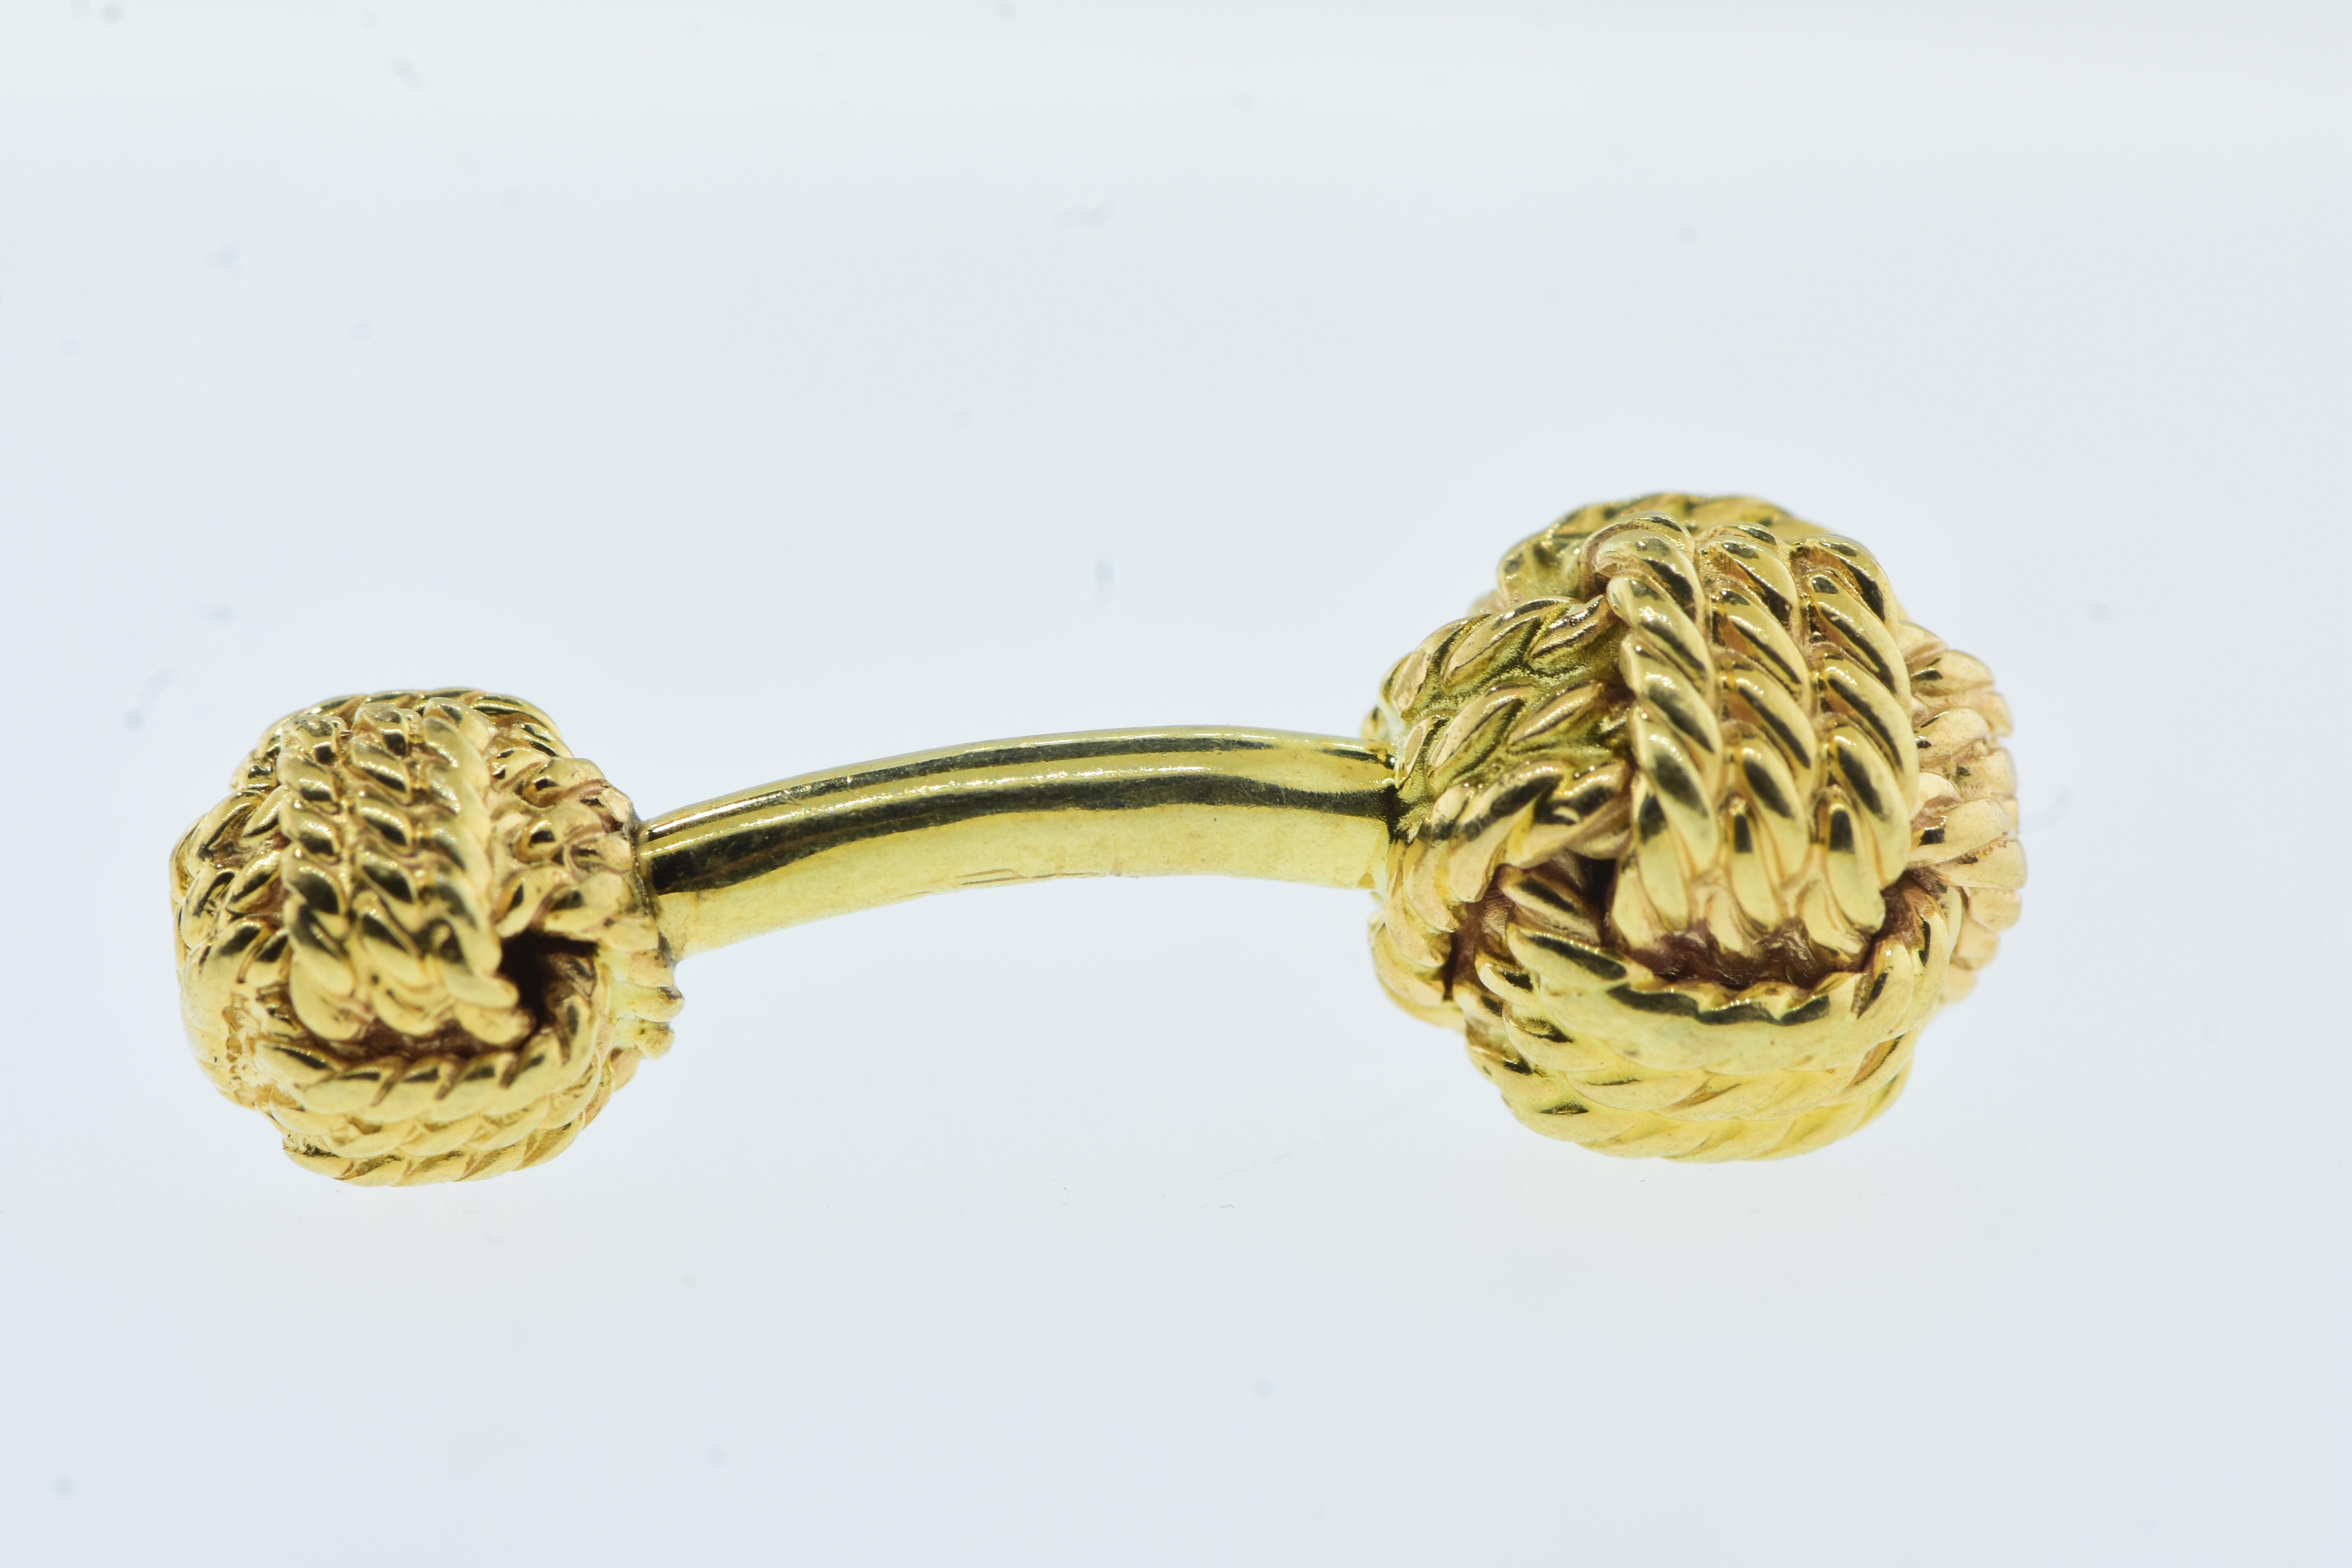 Women's or Men's Tiffany & Co. Yellow Gold Cuff & Stud Set in a Love Knot Motif, Vintage, c. 1970 For Sale